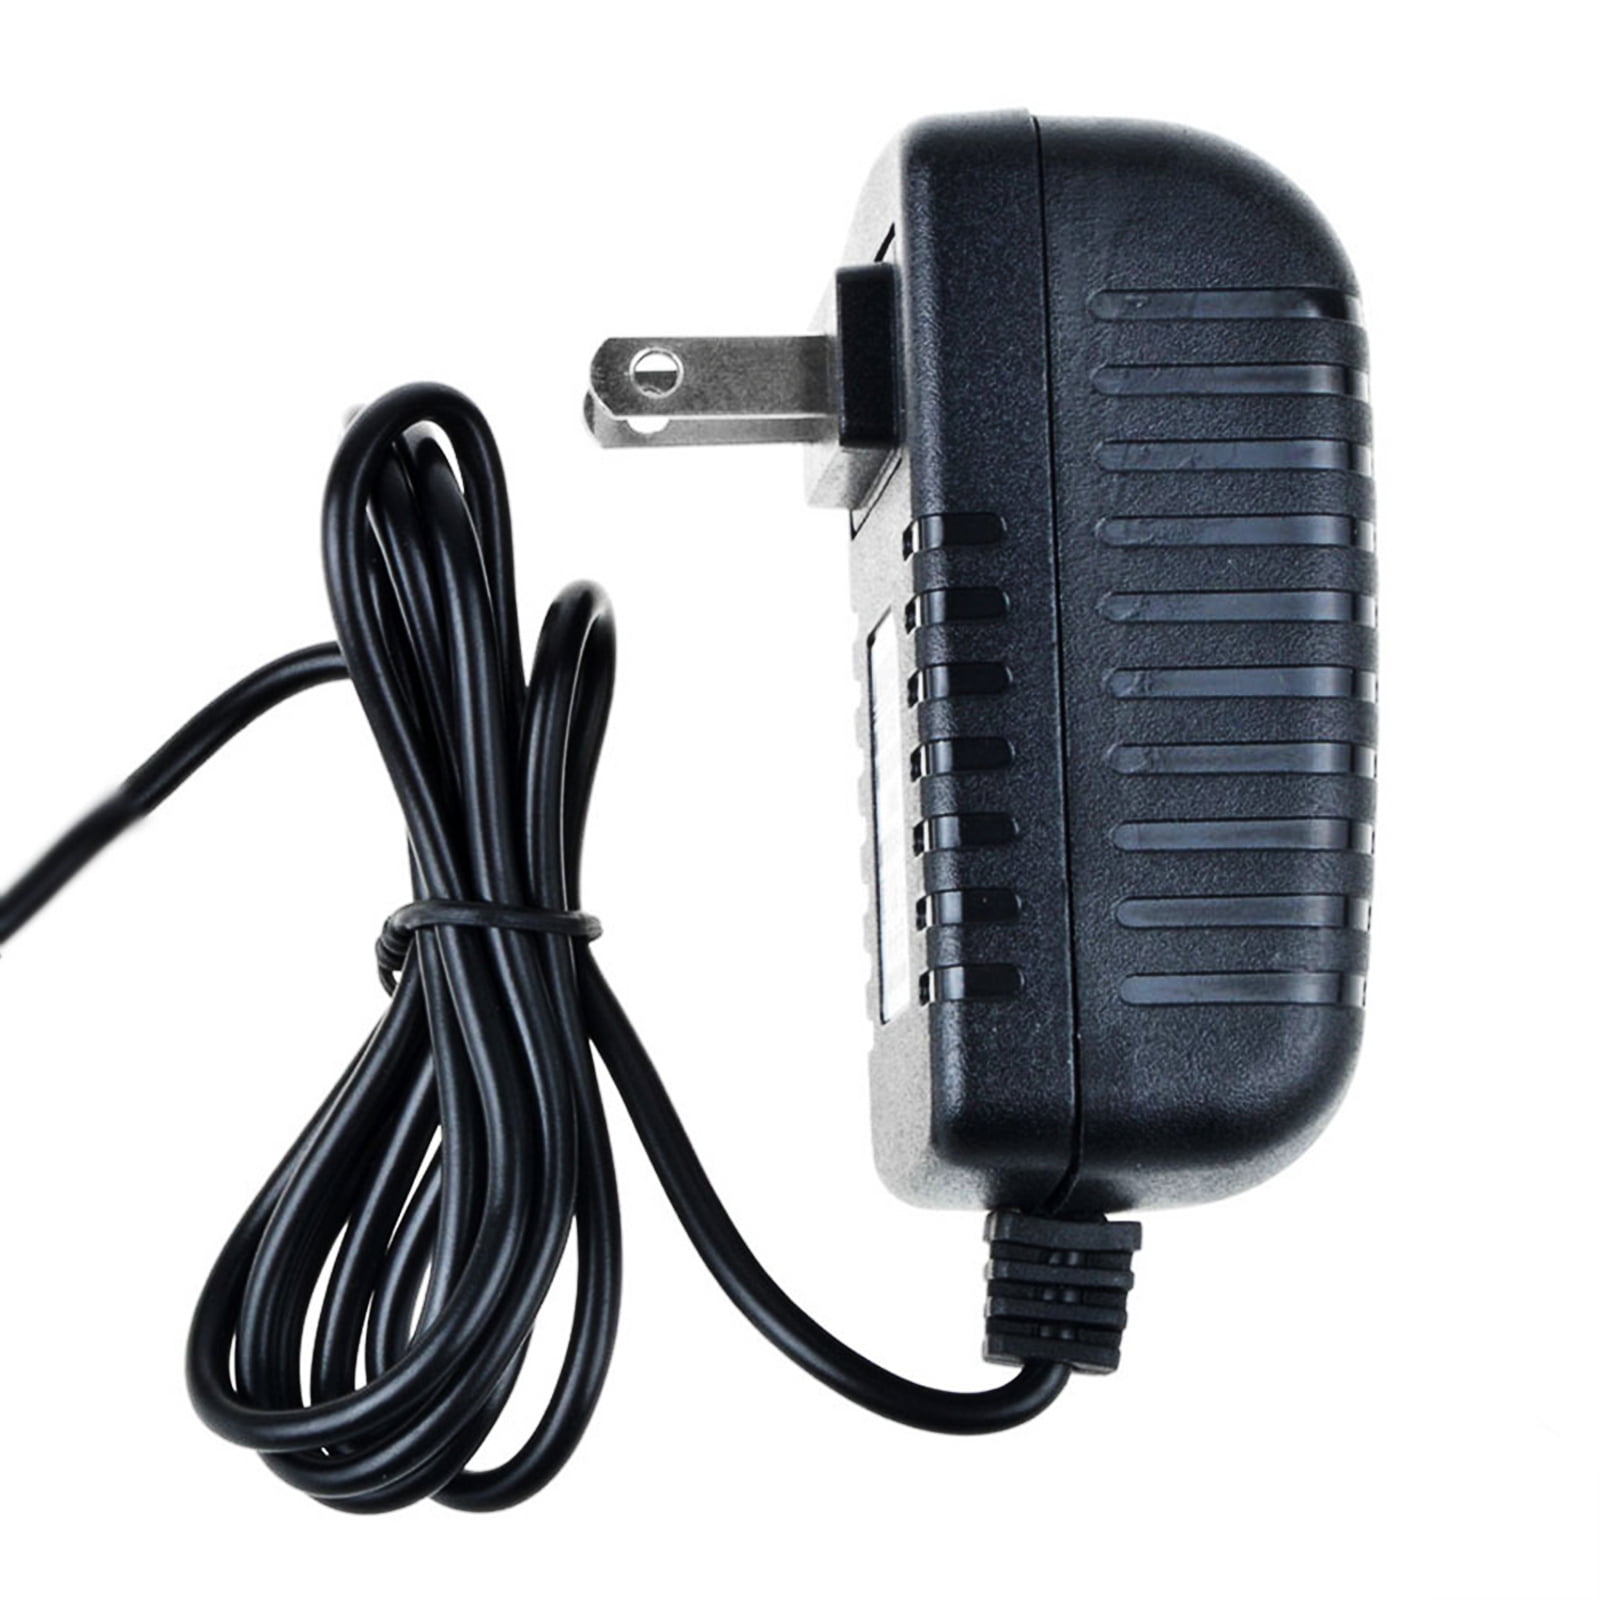 AC Adapter Wall Charger For Cisco Linksys SPA3102 SPA2102 SPA310 Power PSU 